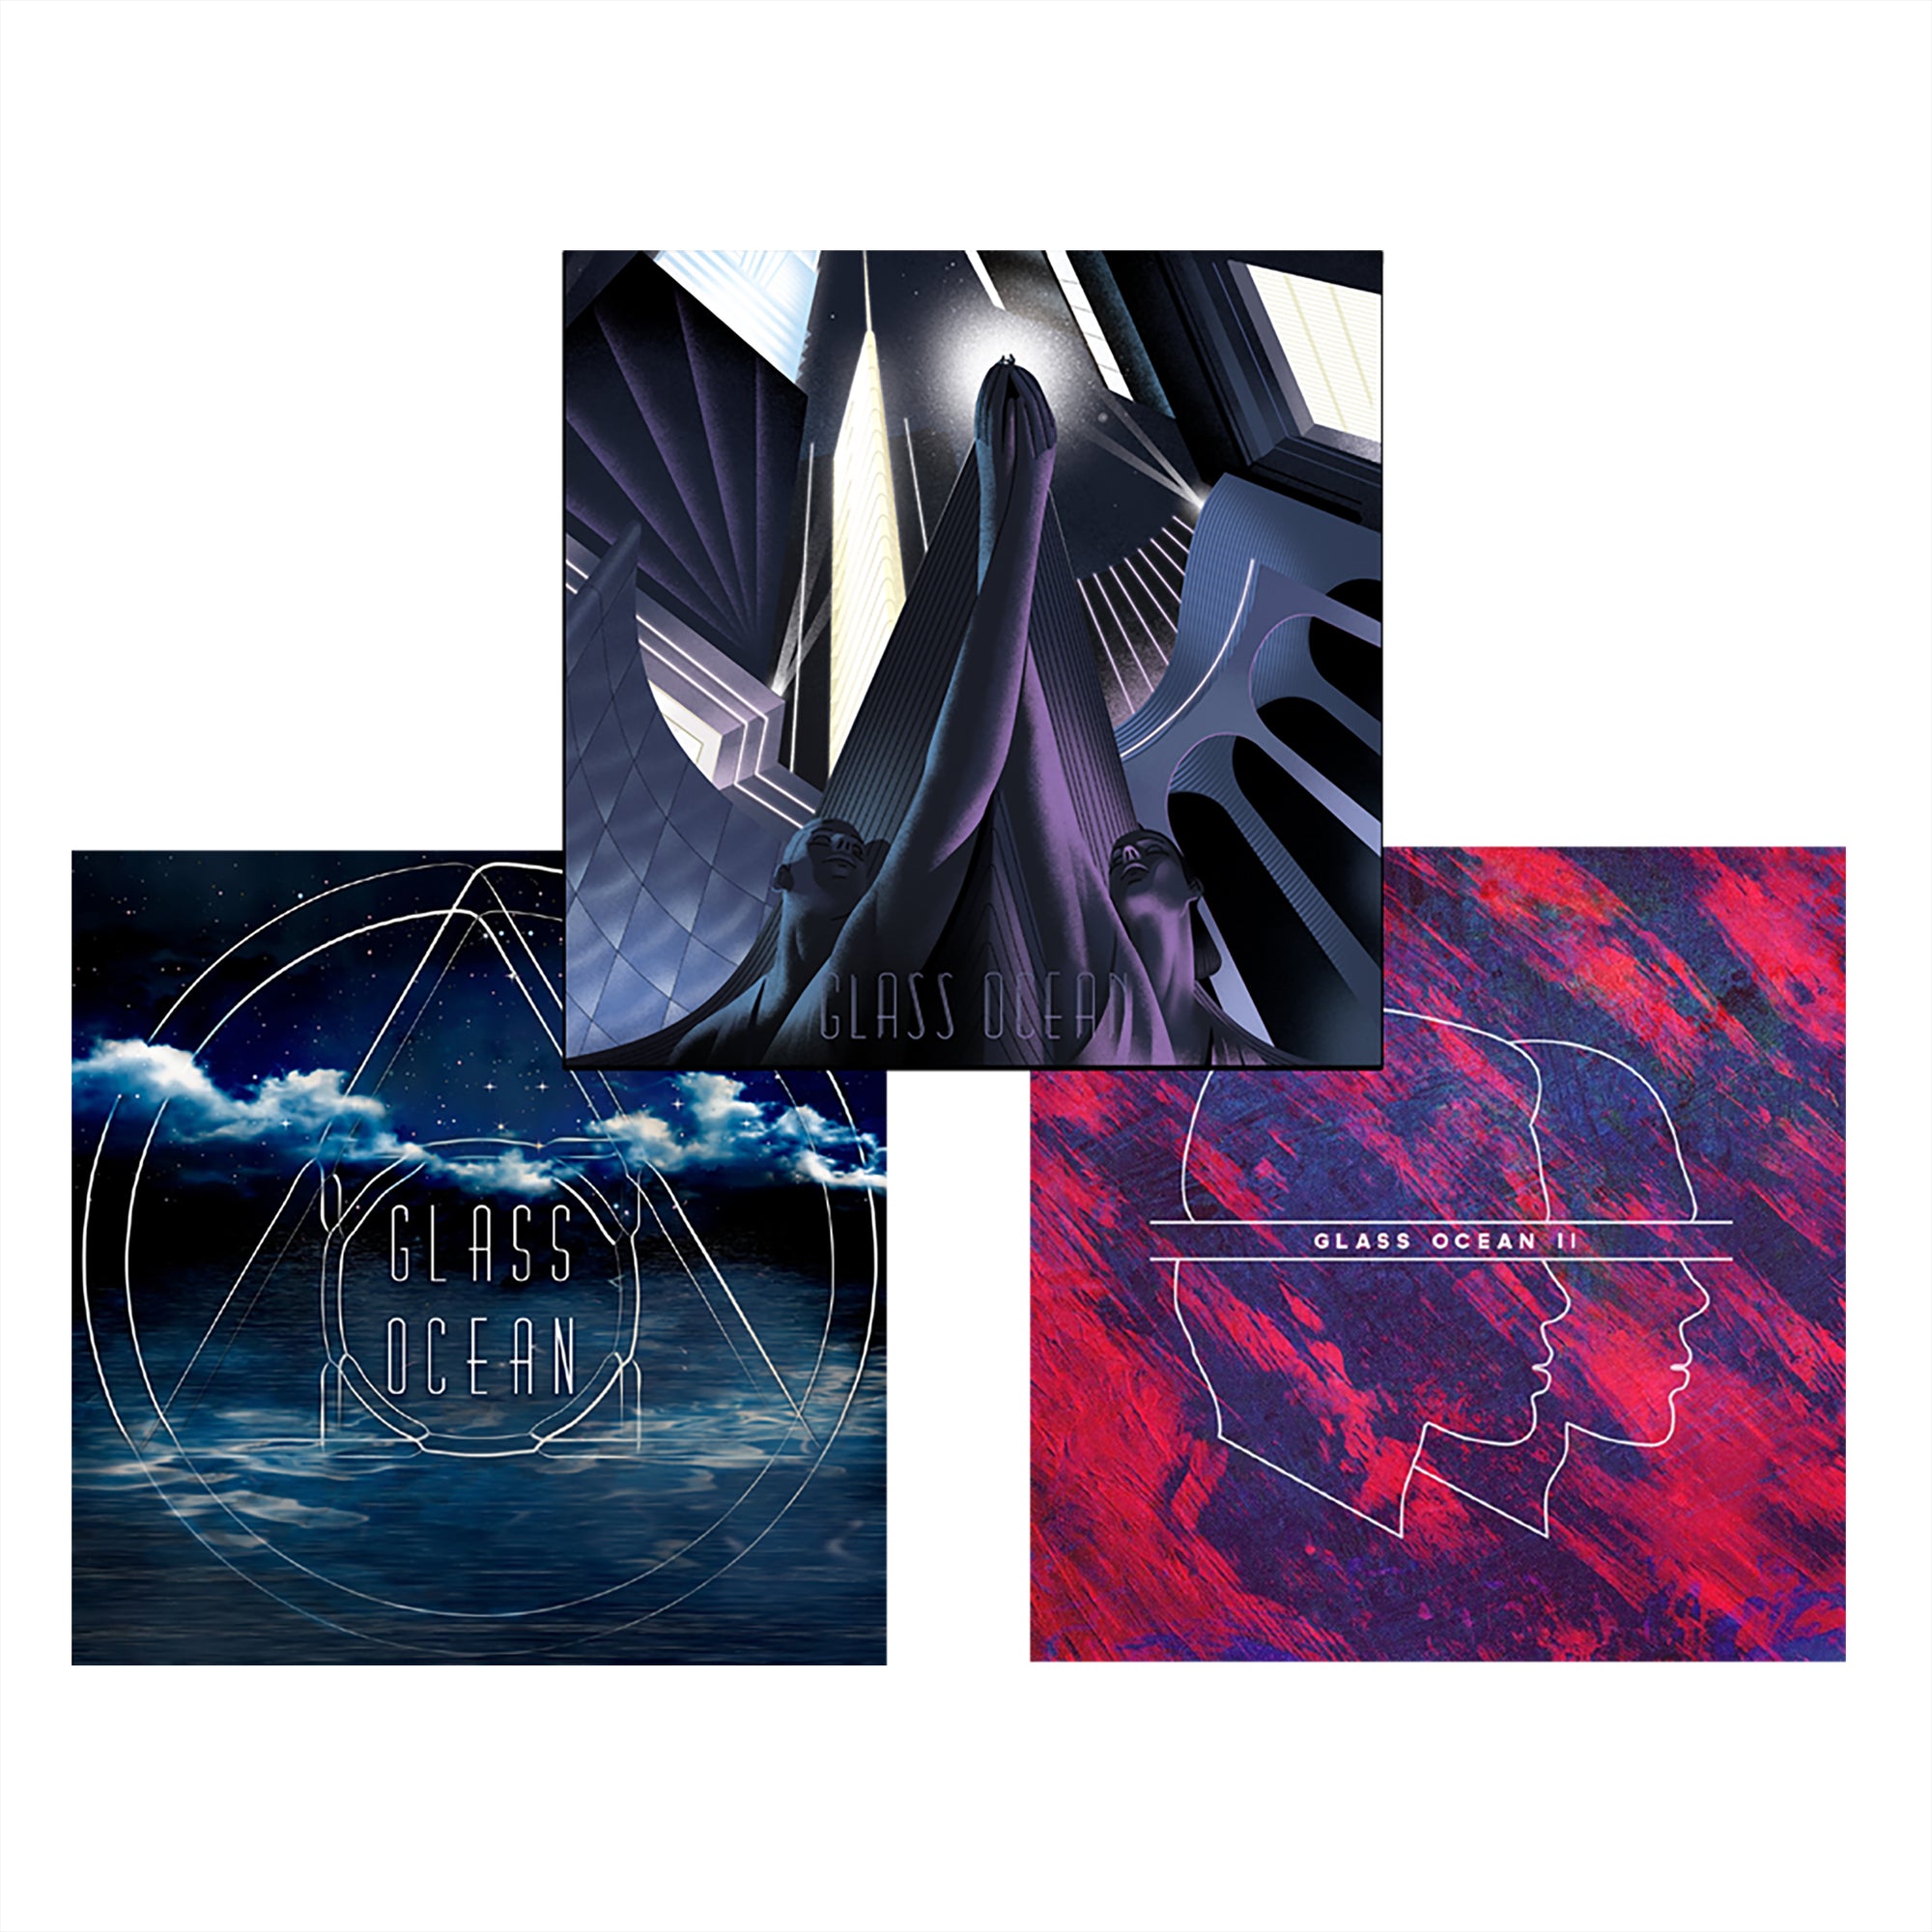 GLASS OCEAN // CD DISCOGRAPHY - Wild Thing Records